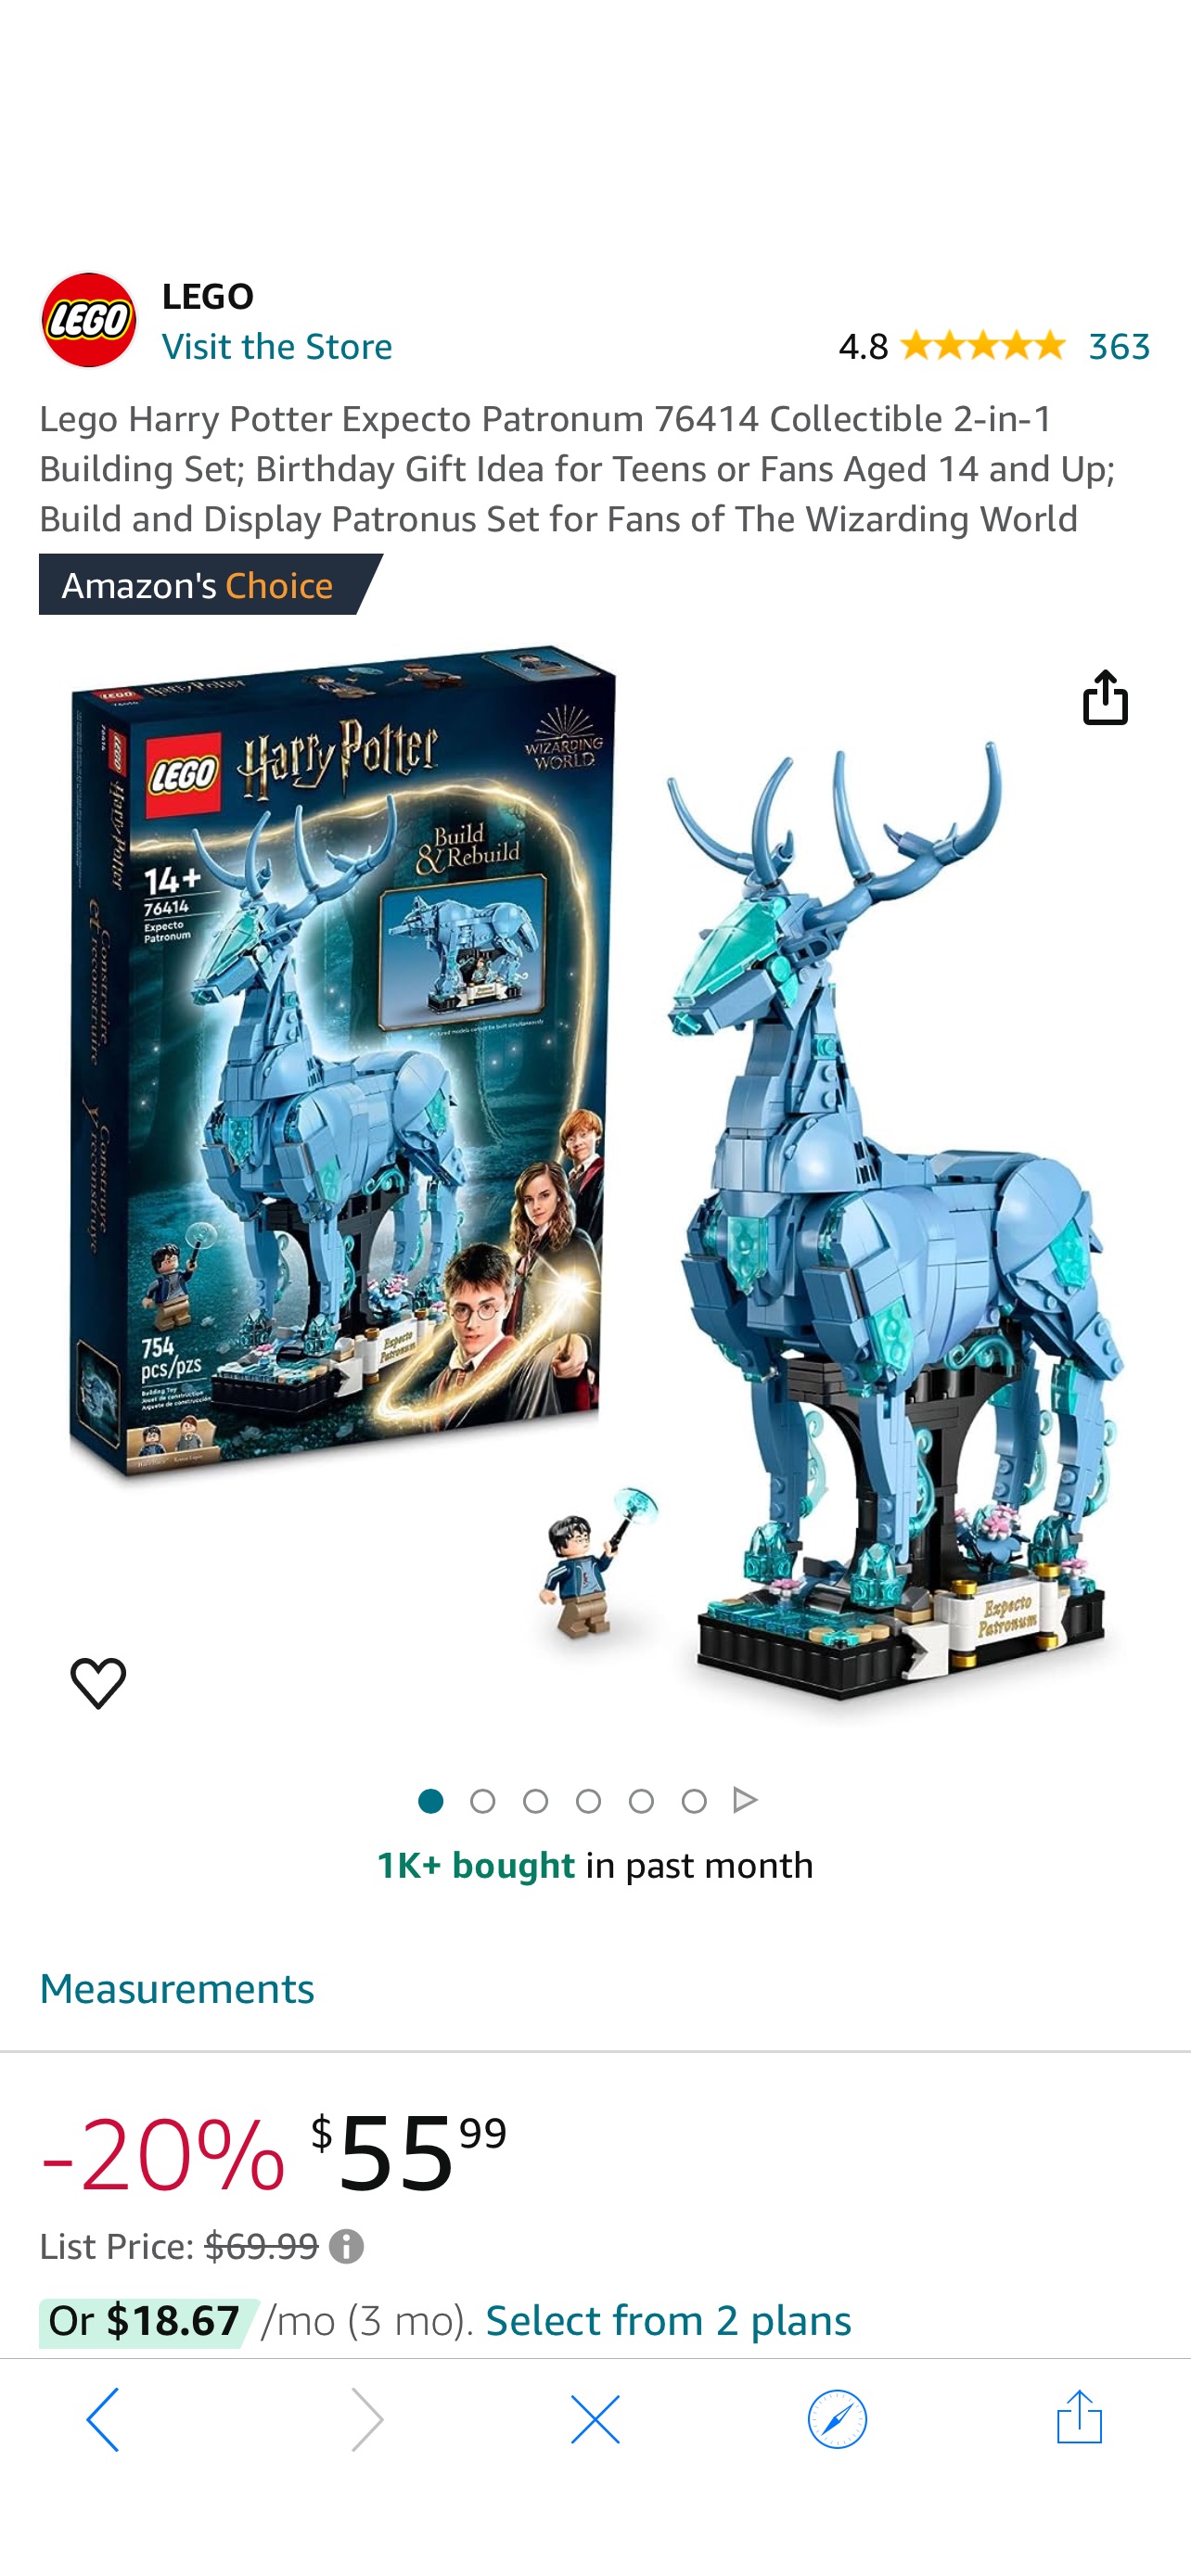 Amazon.com: Lego Harry Potter Expecto Patronum 76414 Collectible 2-in-1 Building Set; Birthday Gift Idea for Teens or Fans Aged 14 and Up; Build and Display Patronus Set for Fans of The Wizarding Worl